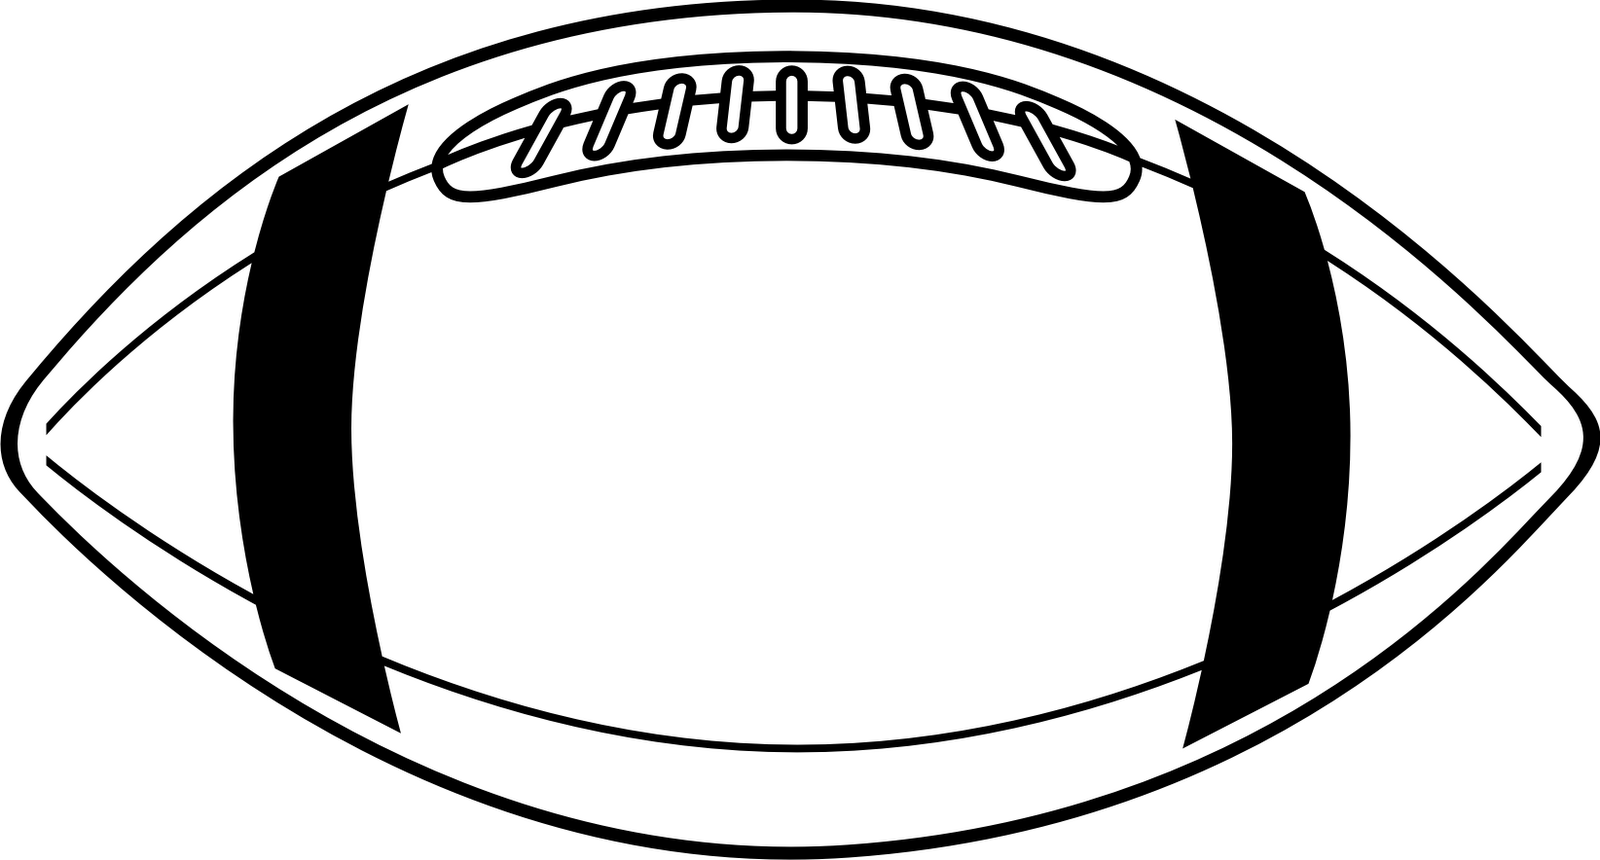 football clipart free black and white - photo #6